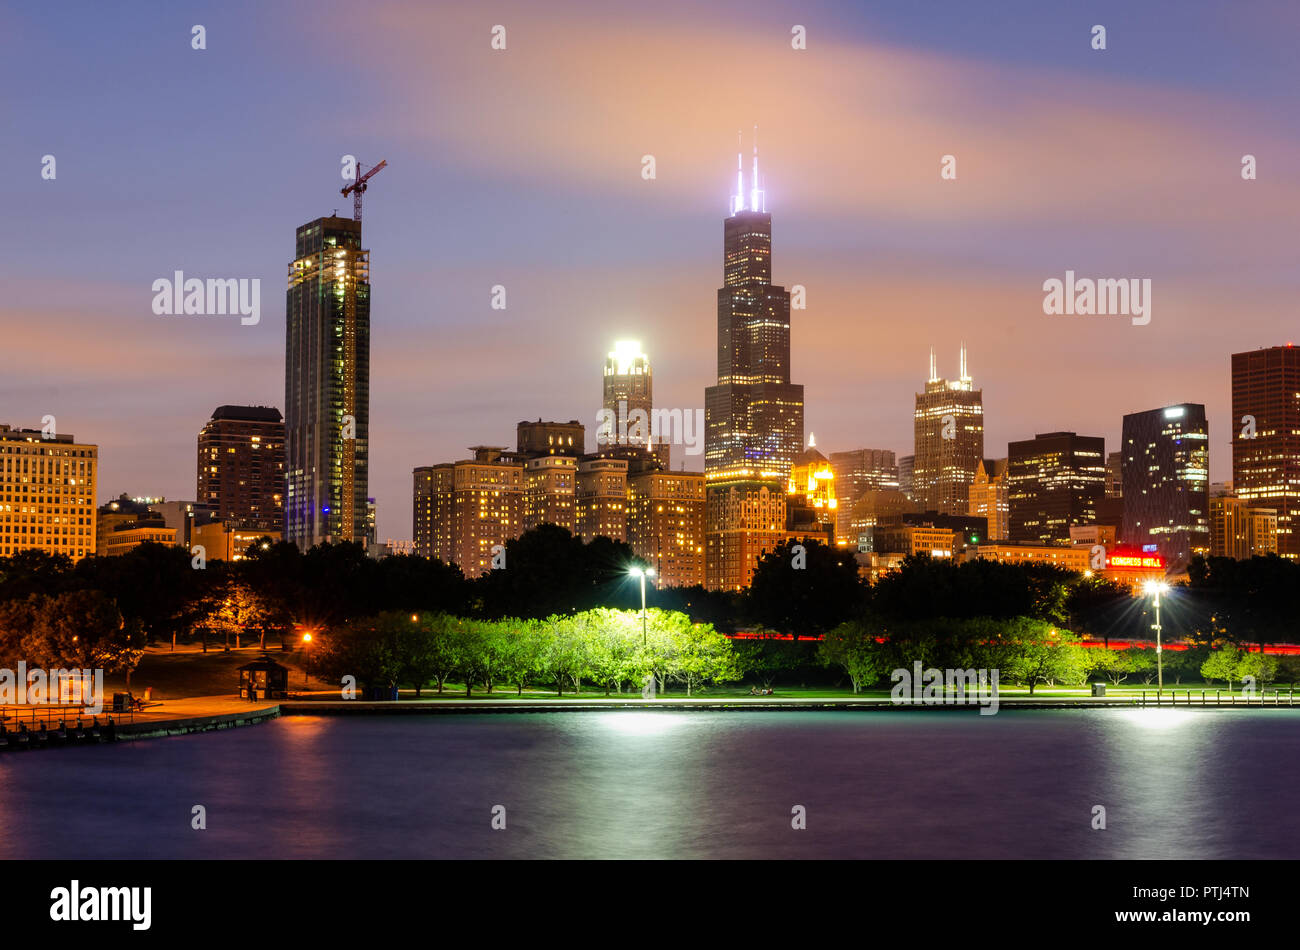 Willis Tower and Chicago skyline at night Stock Photo